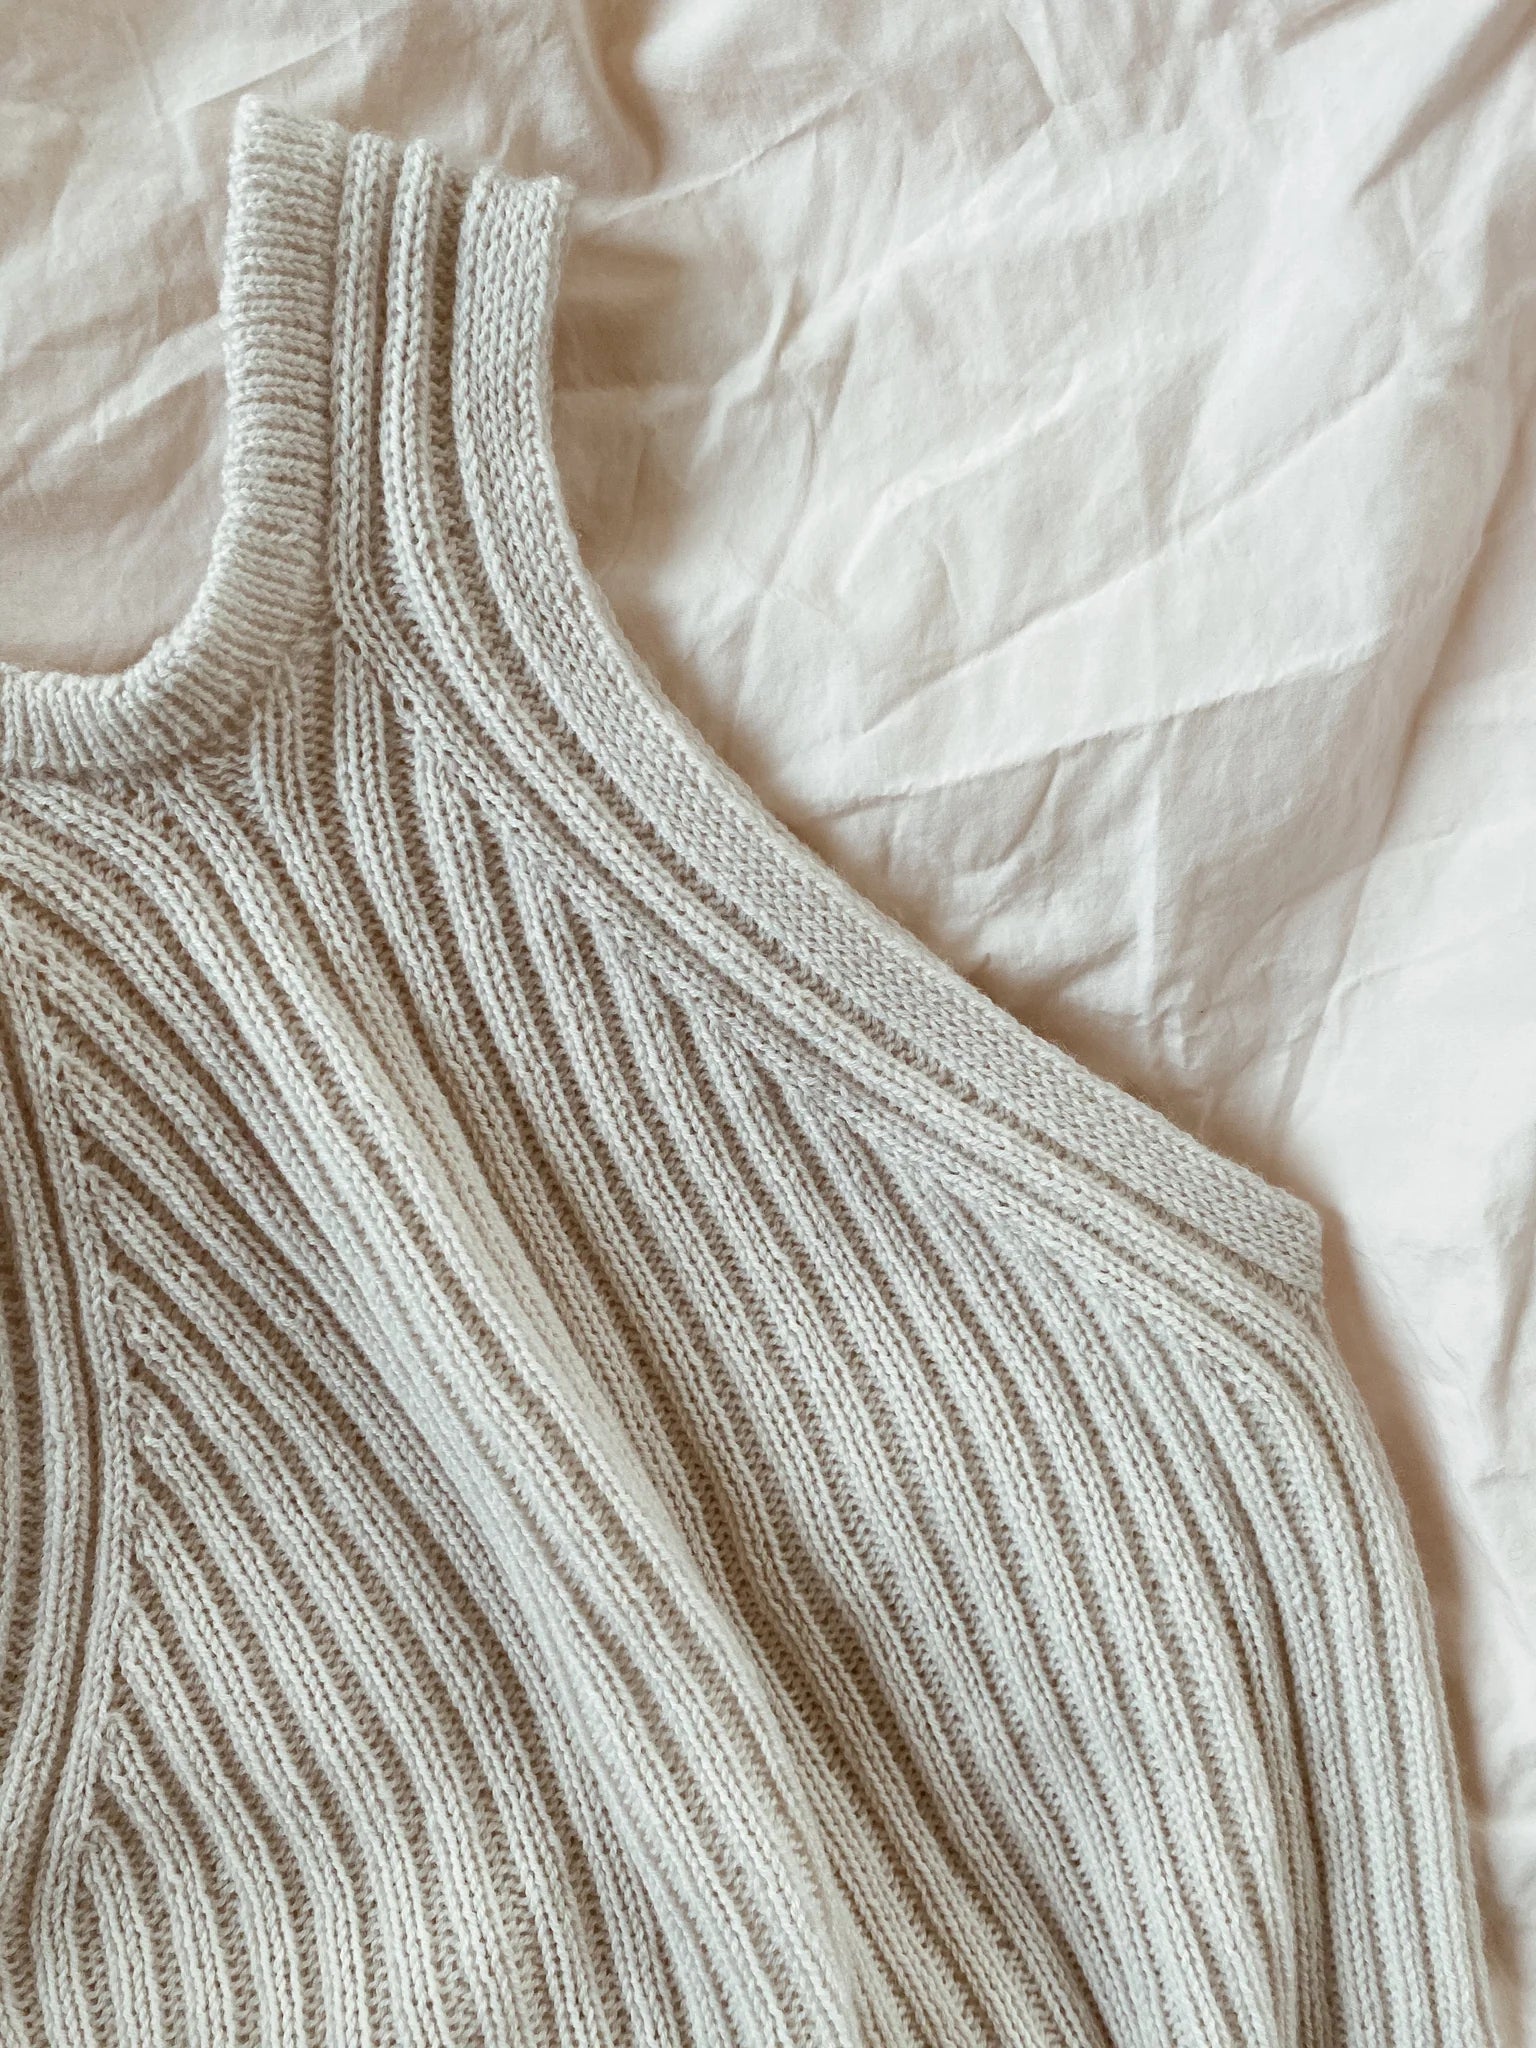 Camisole No. 5 My Favourite Things Knitwear - Strikkekit